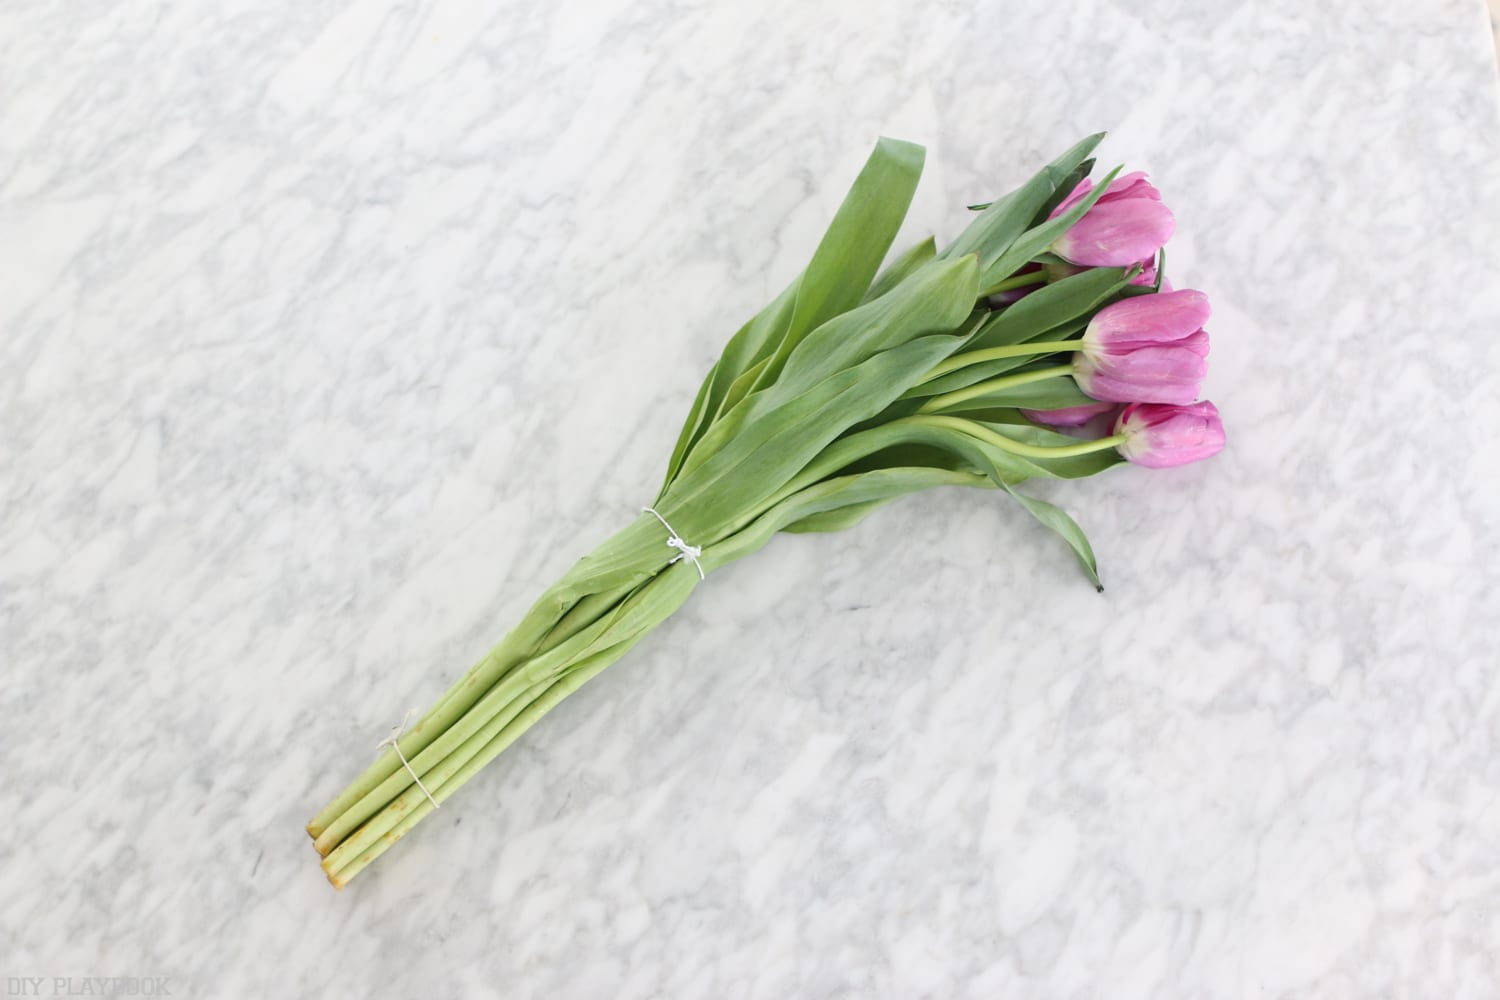 How to perfectly arrange your tulips